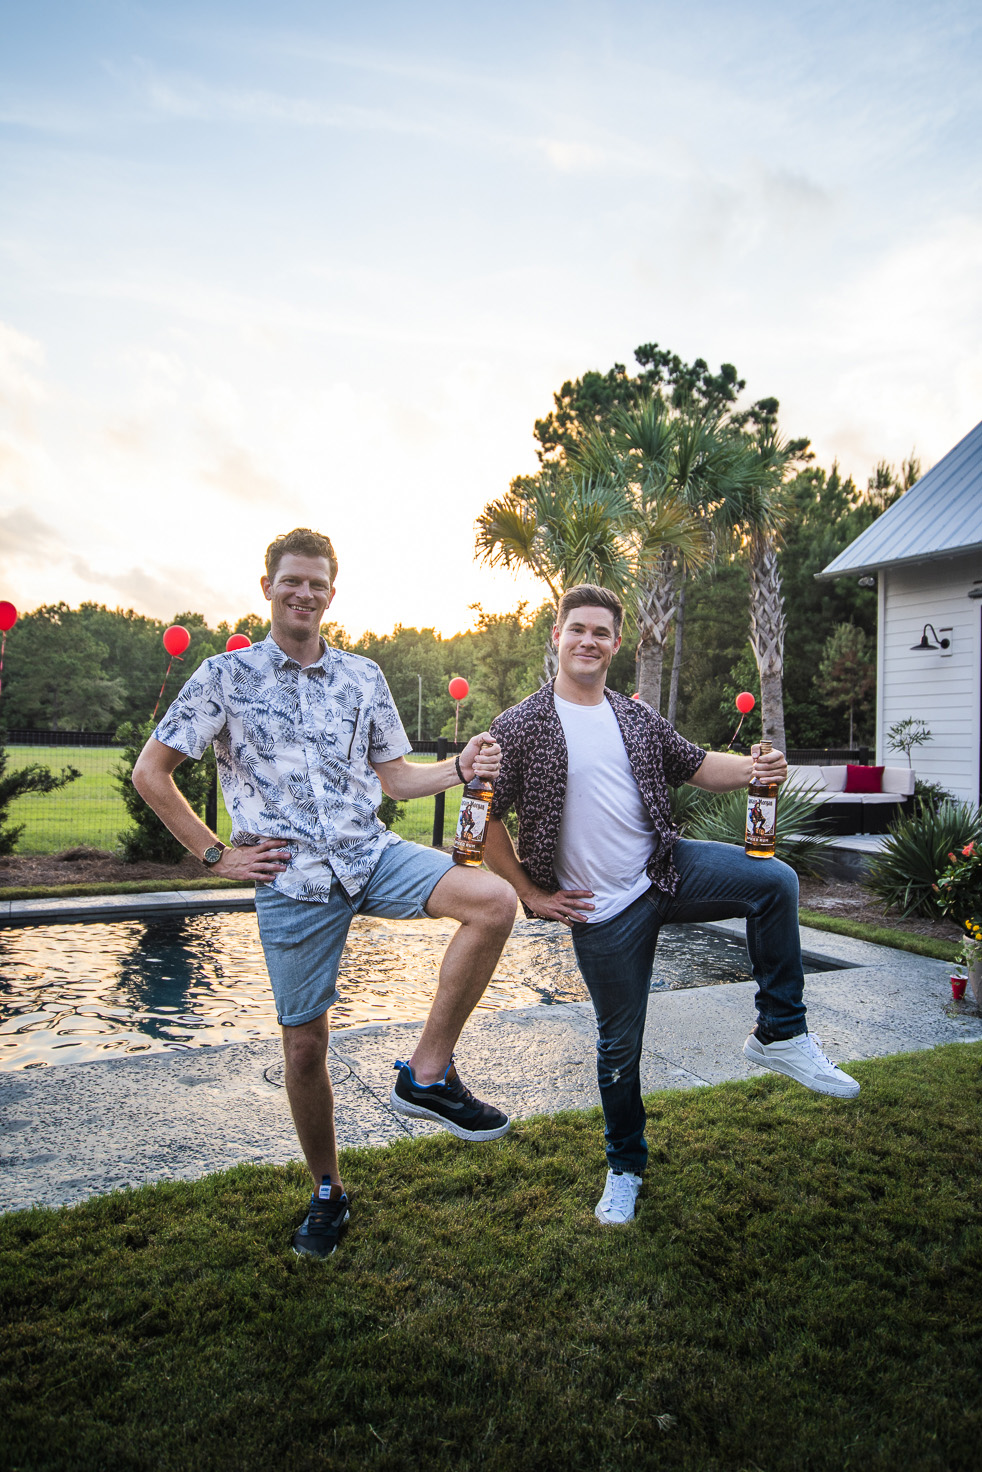 Adam Devine and Tyler Tills strike Captain Morgan’s iconic one-legged pose at Tyler’s surprise 30th birthday party.